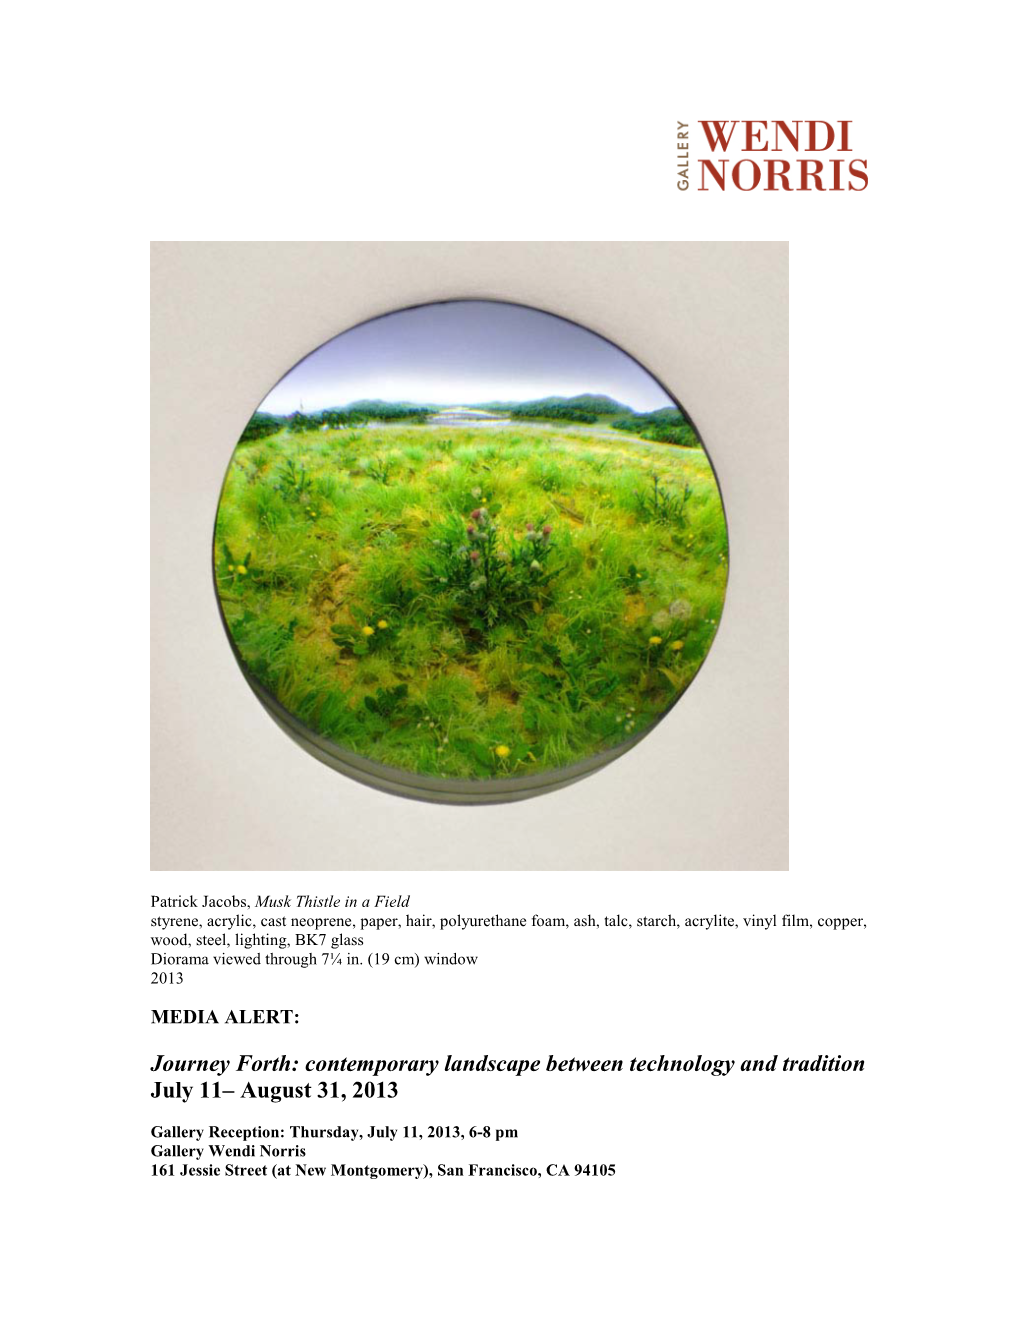 Journey Forth: Contemporary Landscape Between Technology and Tradition July 11– August 31, 2013